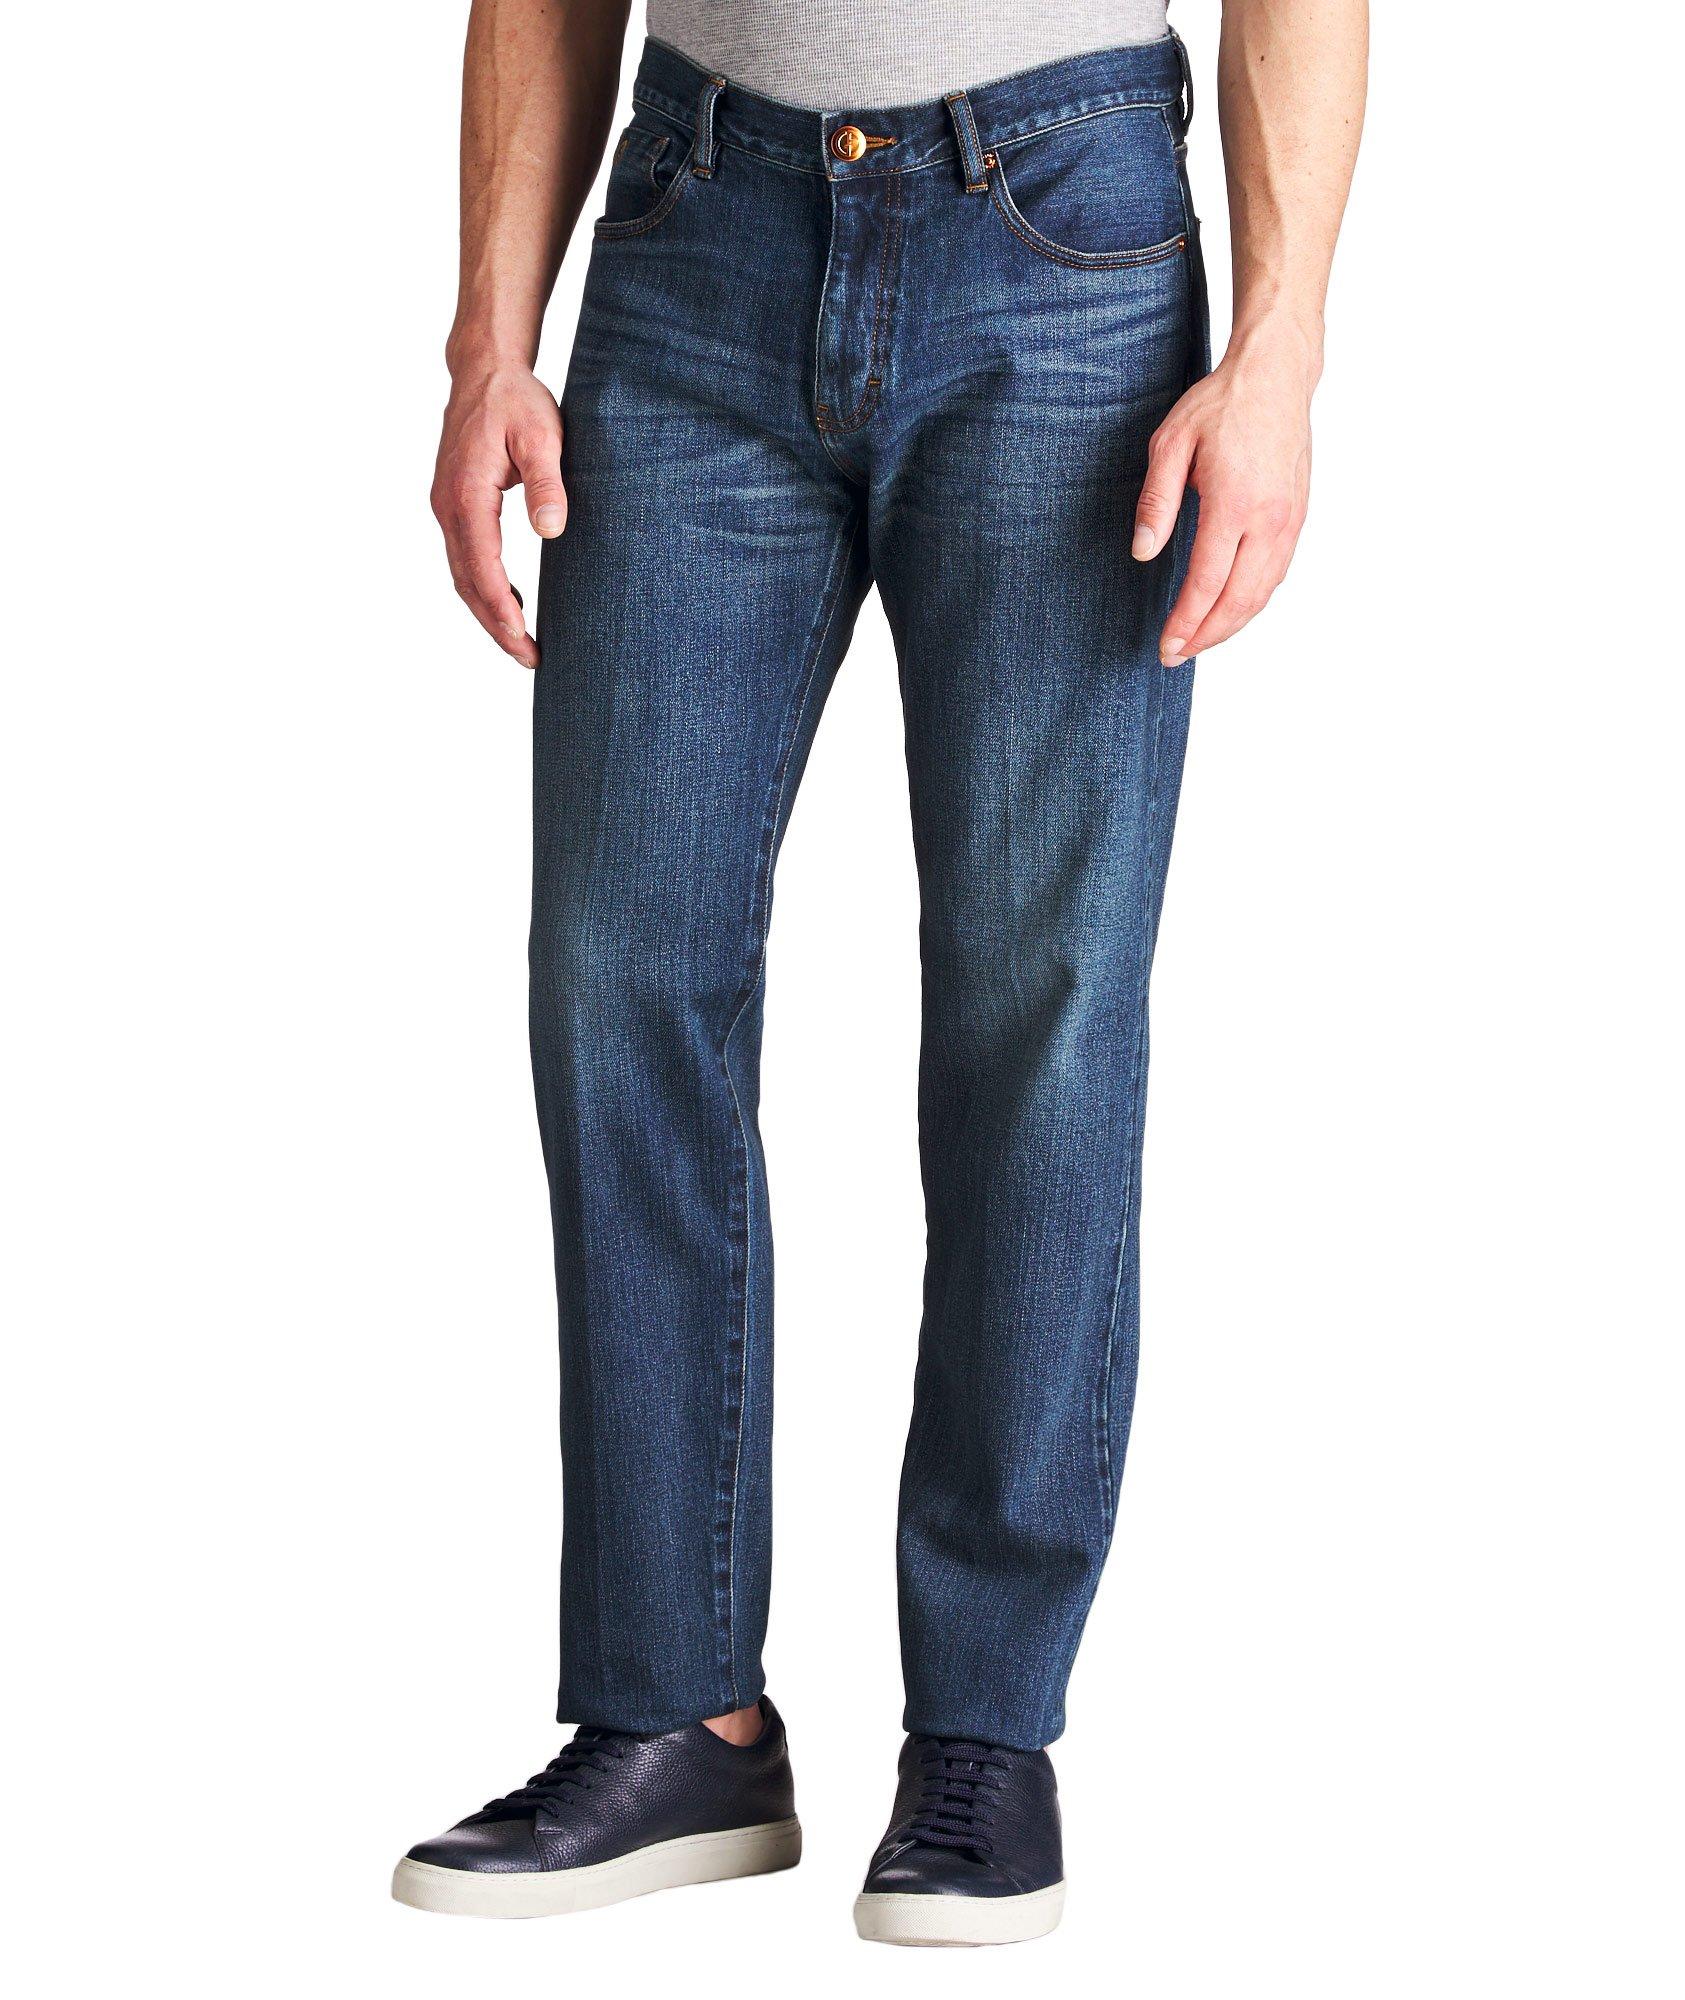 Straight Fit Selvedge Jeans image 0